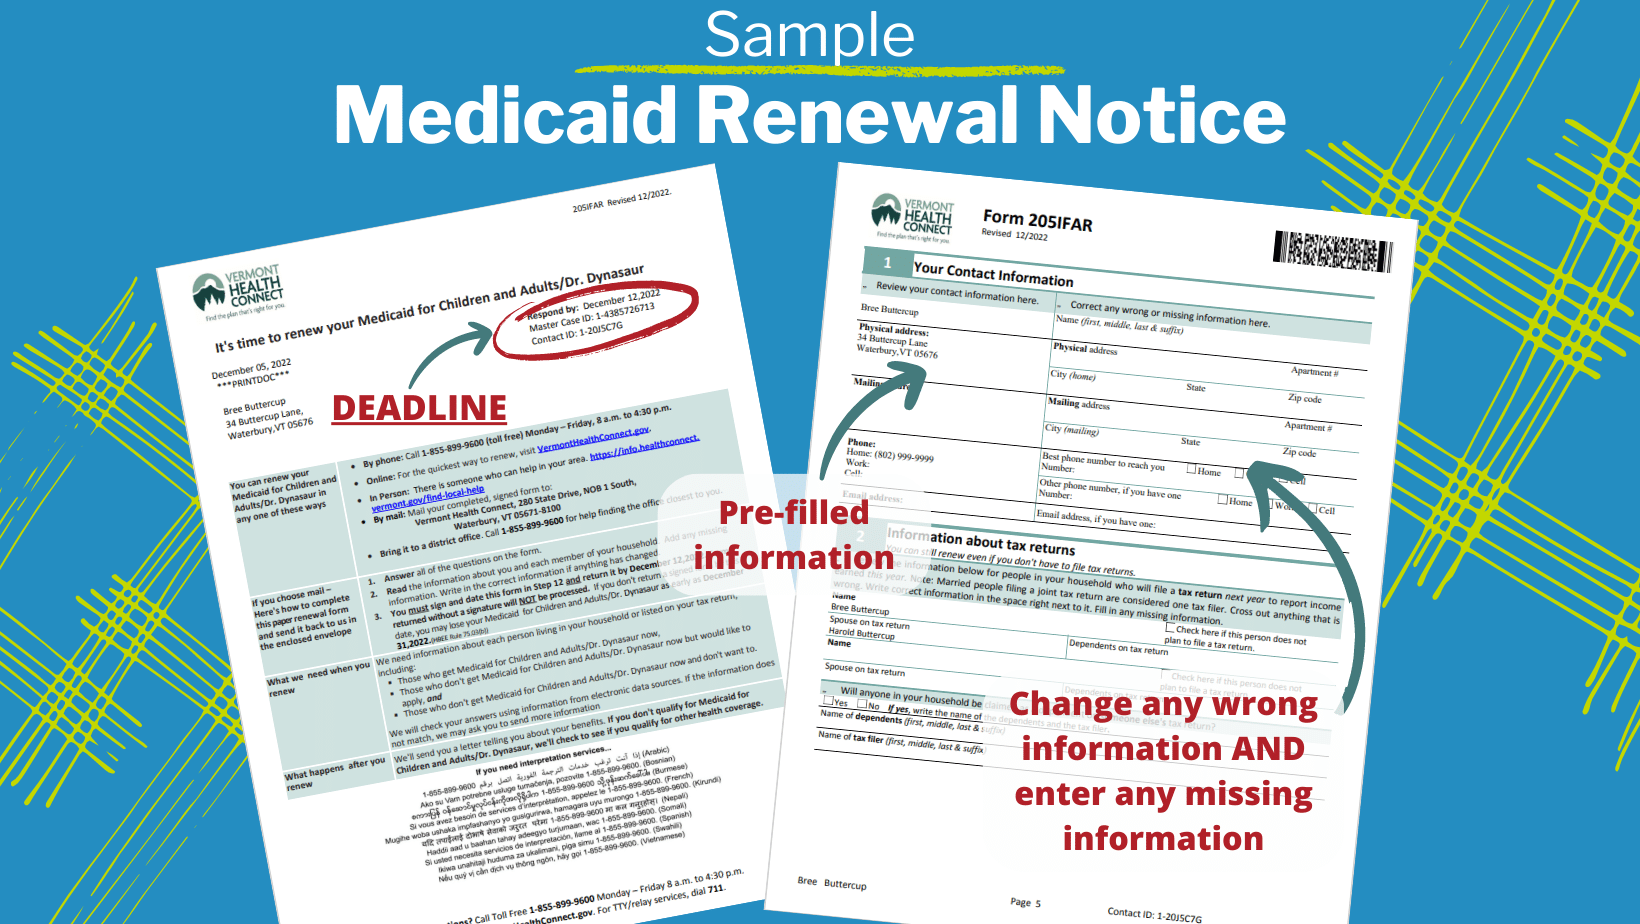 Graphic of Medicaid renewal letter (205IFAR)